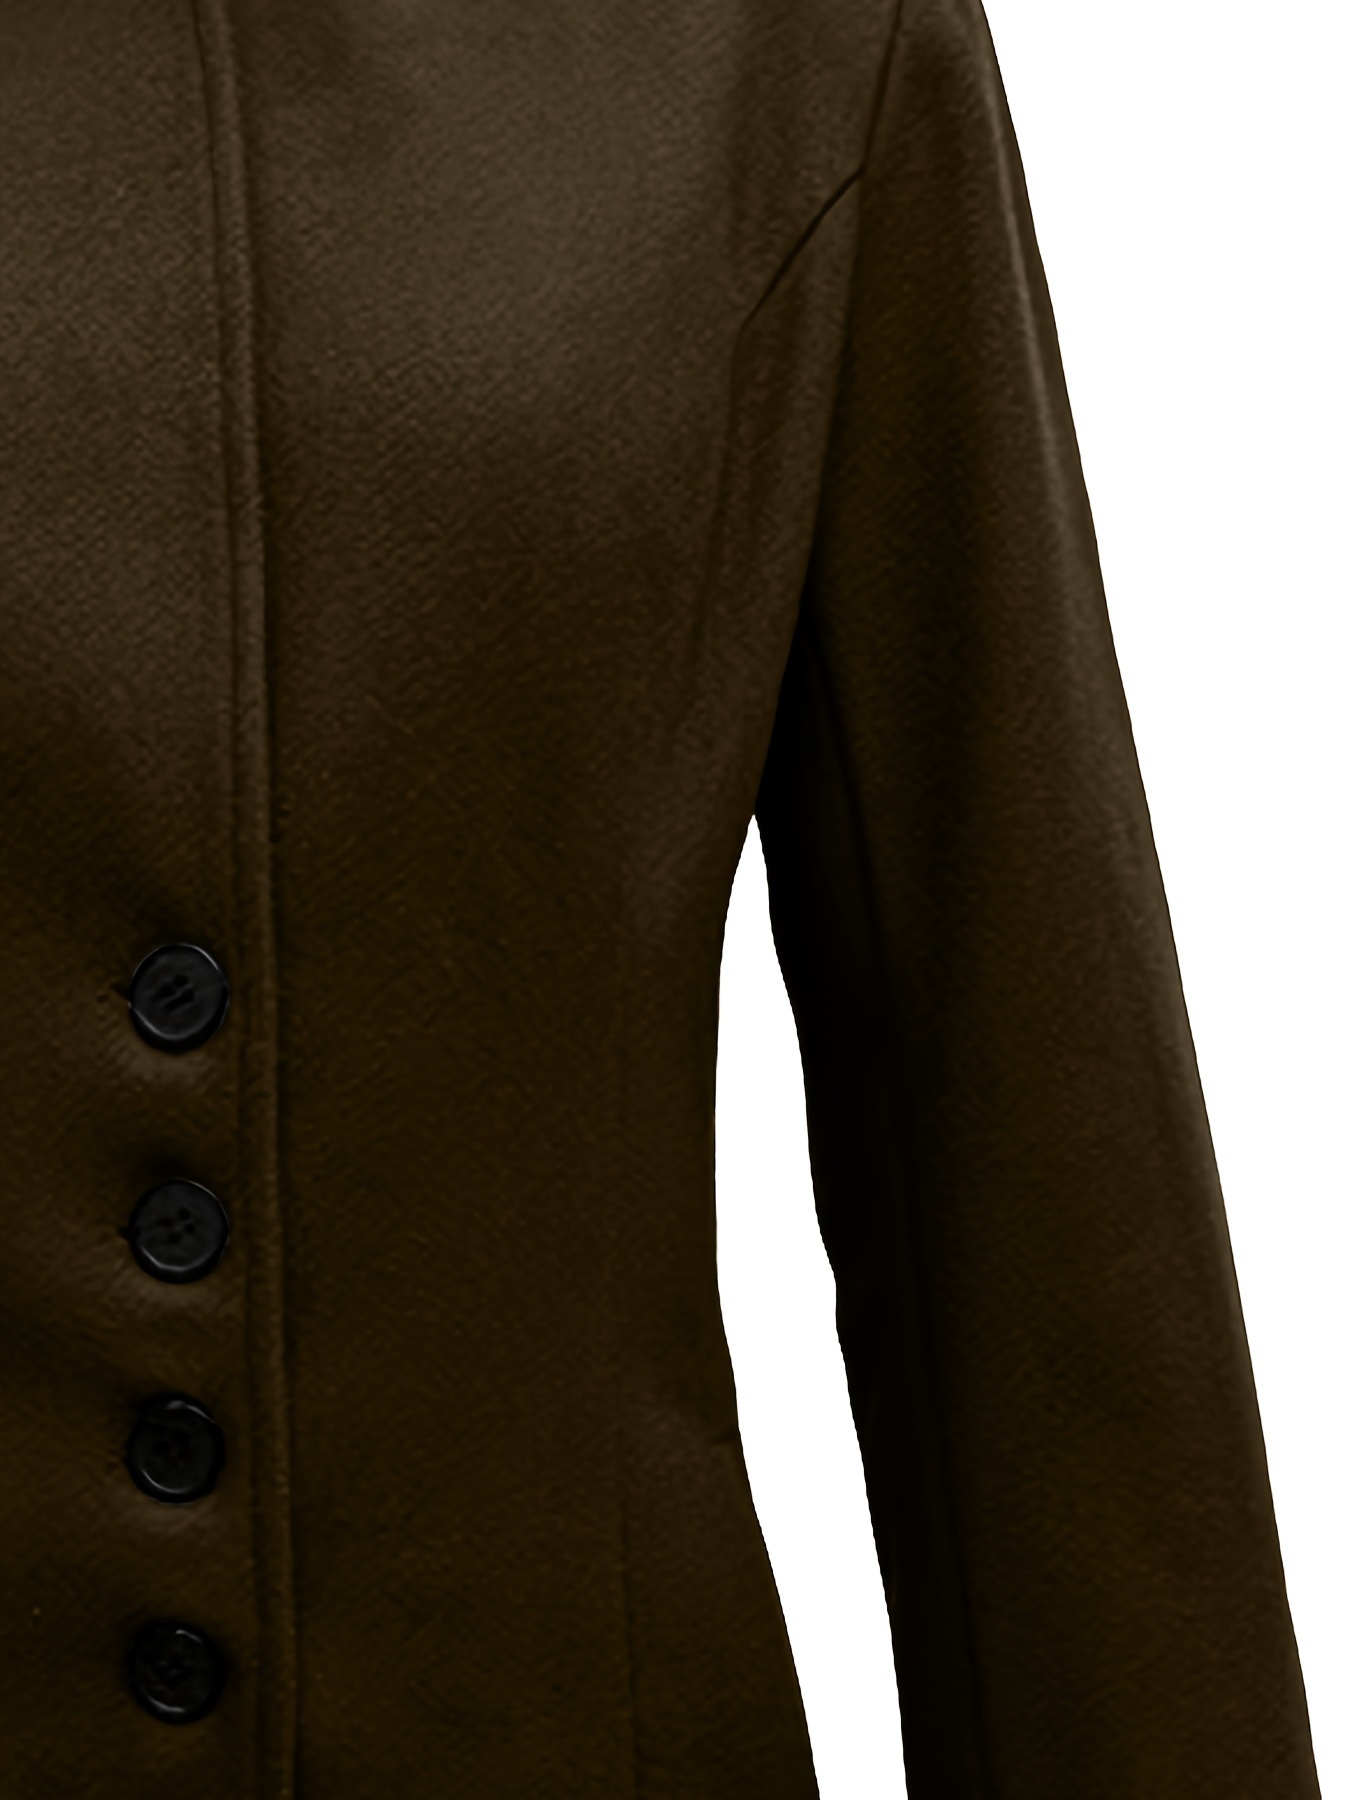 Single Breasted Solid Coat, Elegant Long Sleeve Versatile Outerwear,  Women's Clothing